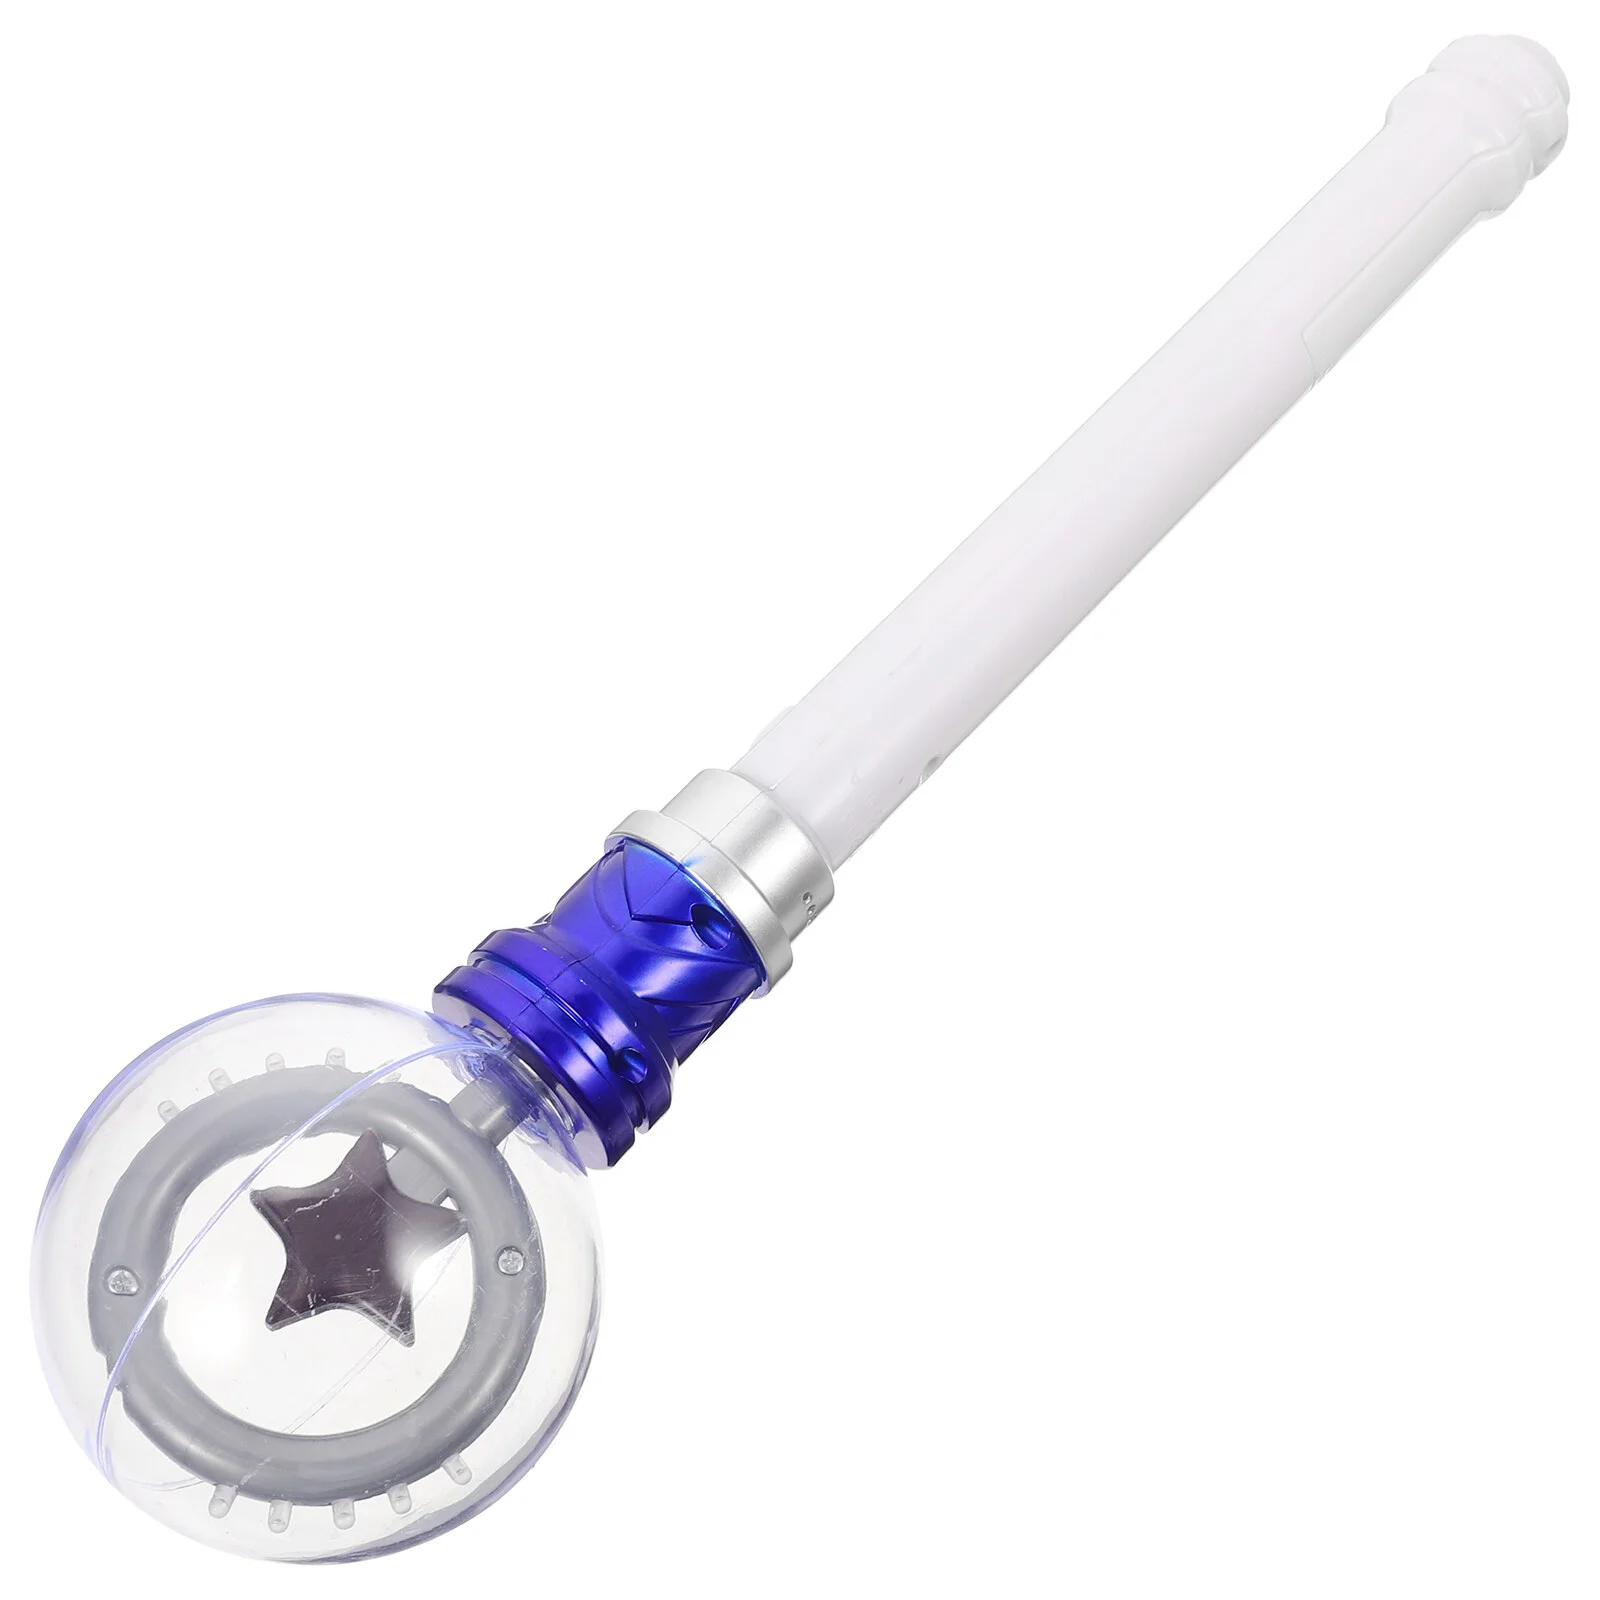 

Light Orbiter Wand: Led Glowing Sticks Sensory Toys Glow In The Dark Party Supplies For Birthday Cheering Concert Wedding Blue